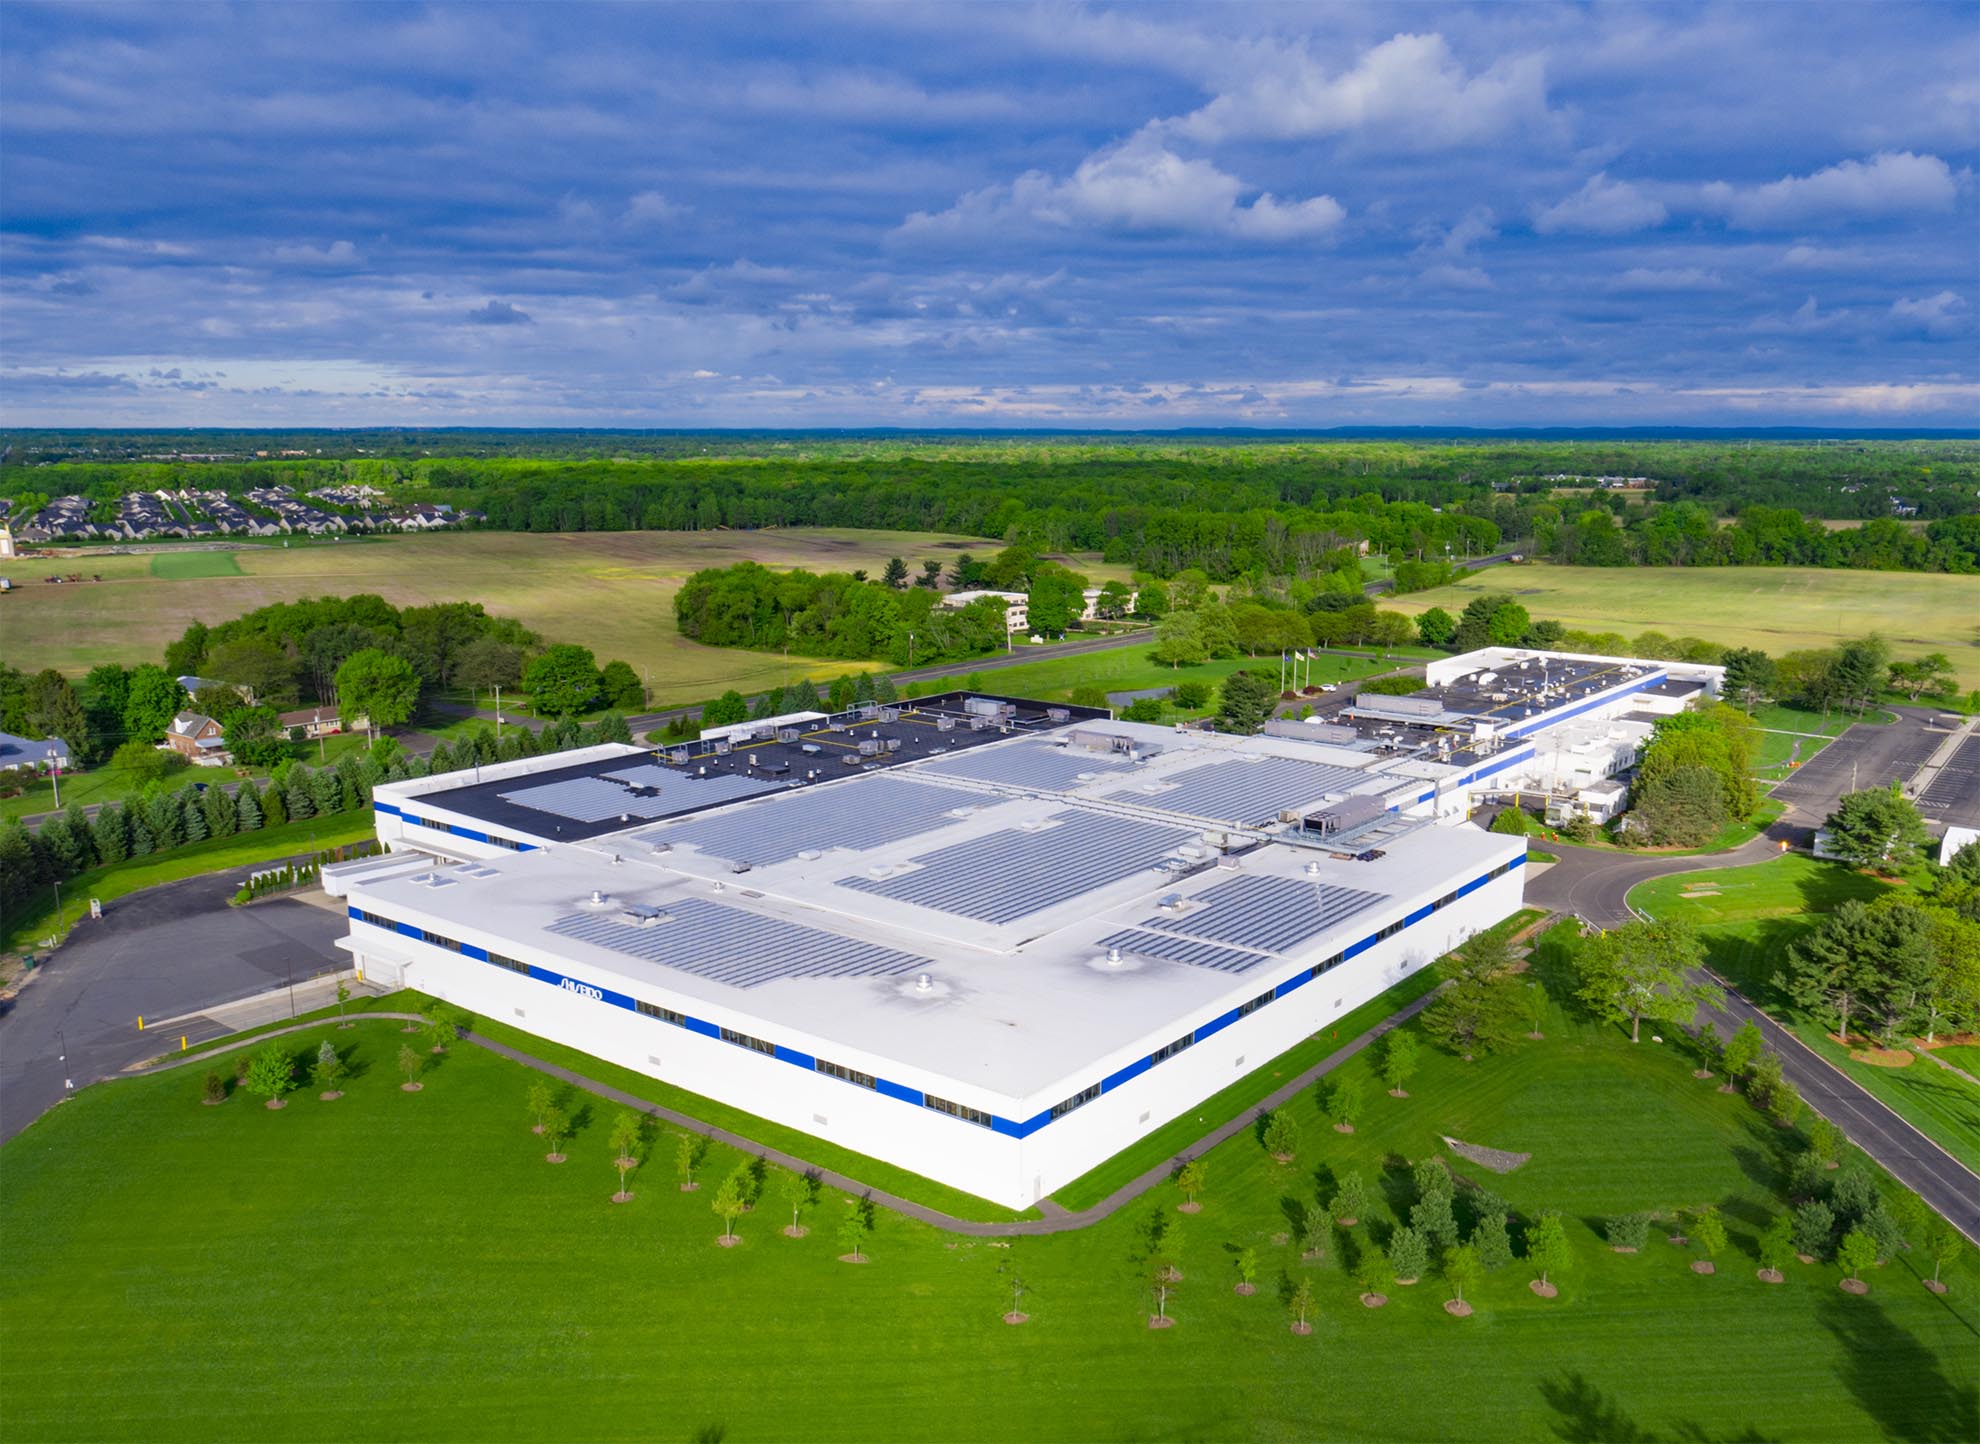 Drone photograph of Shiseido production facility in New Jersey